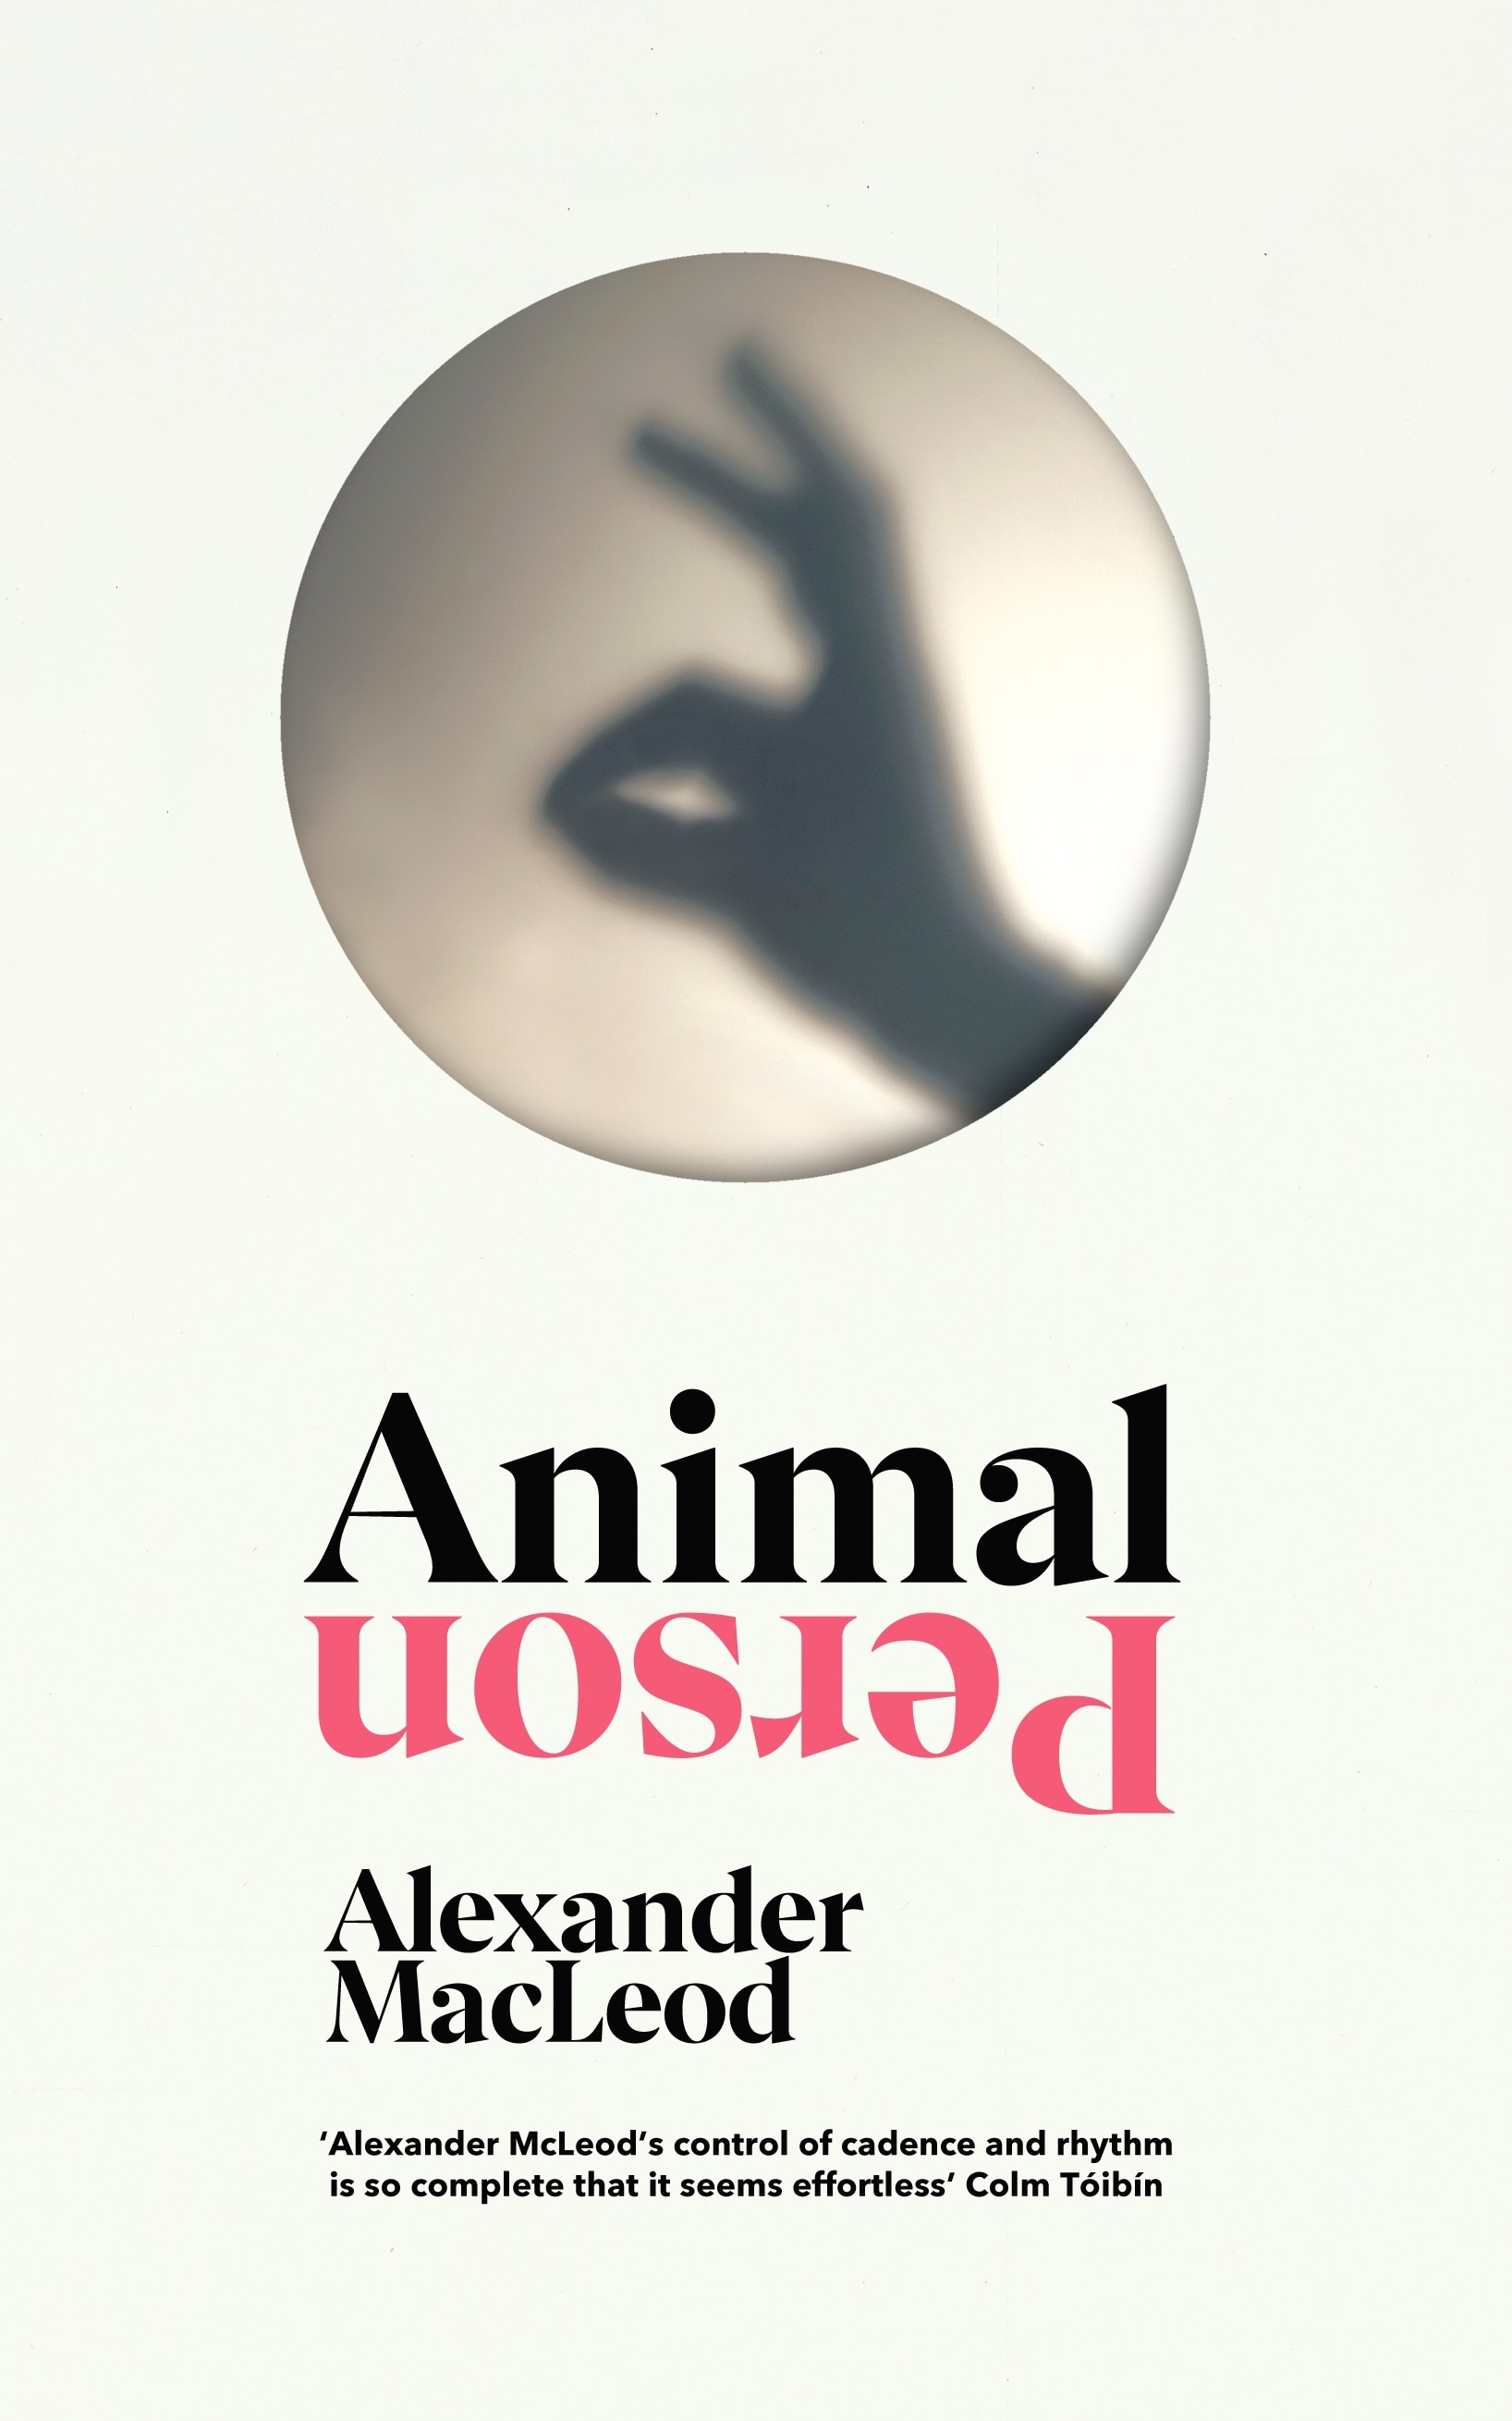 Book “Animal Person” by Alexander MacLeod — April 7, 2022